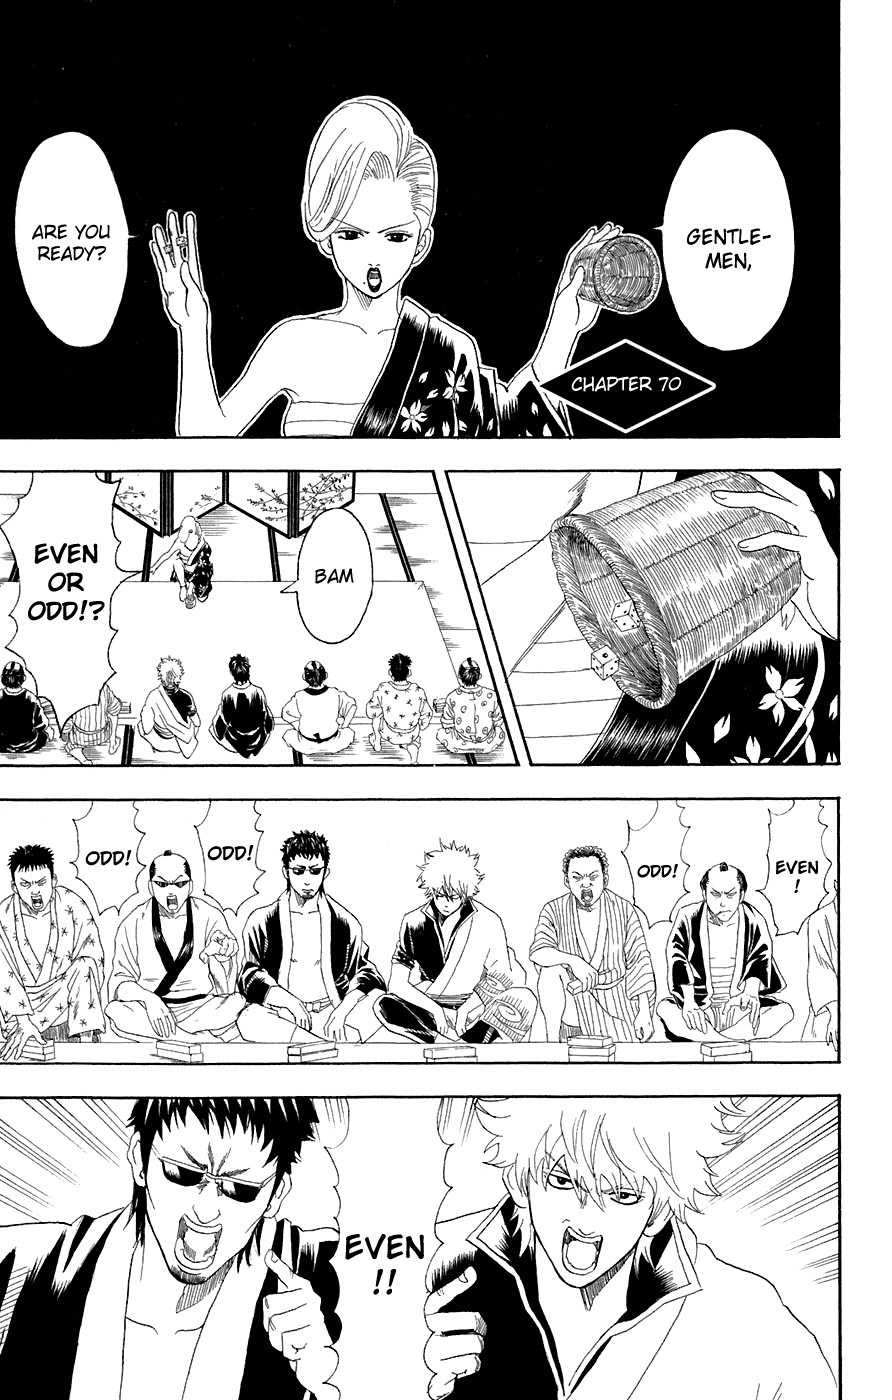 Gintama chapter 70 page 1